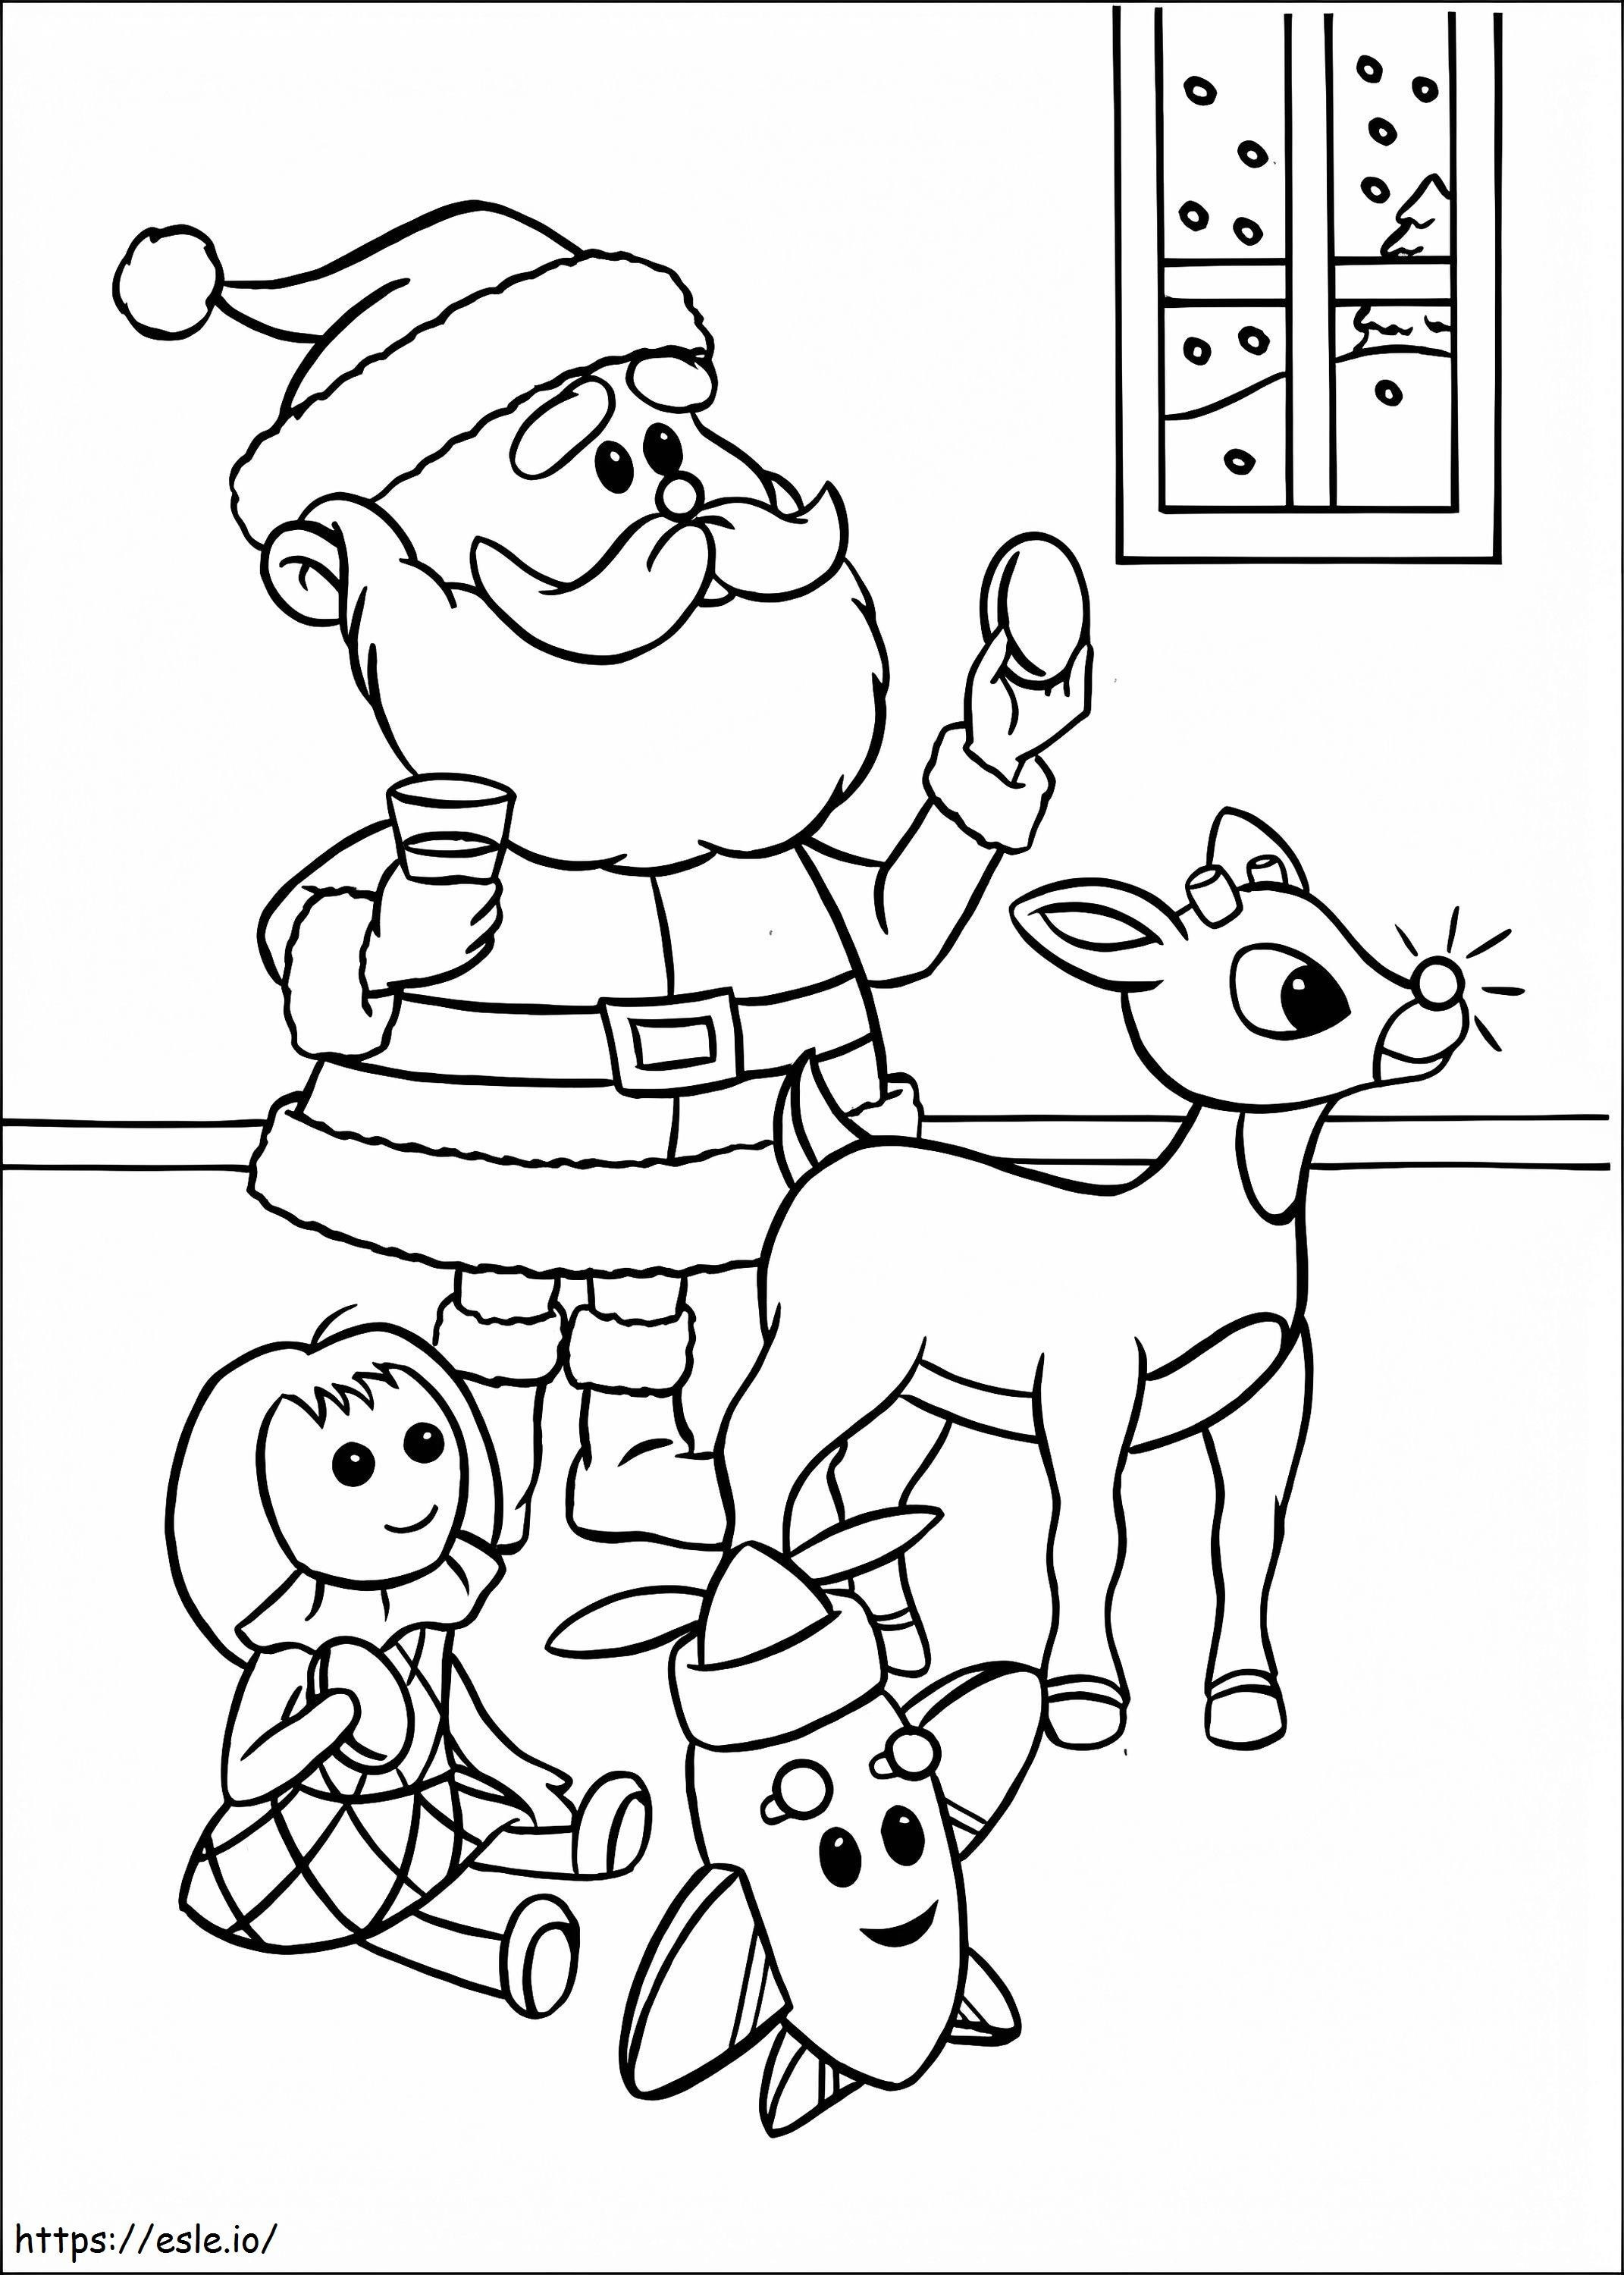 Rudolph With Santa coloring page